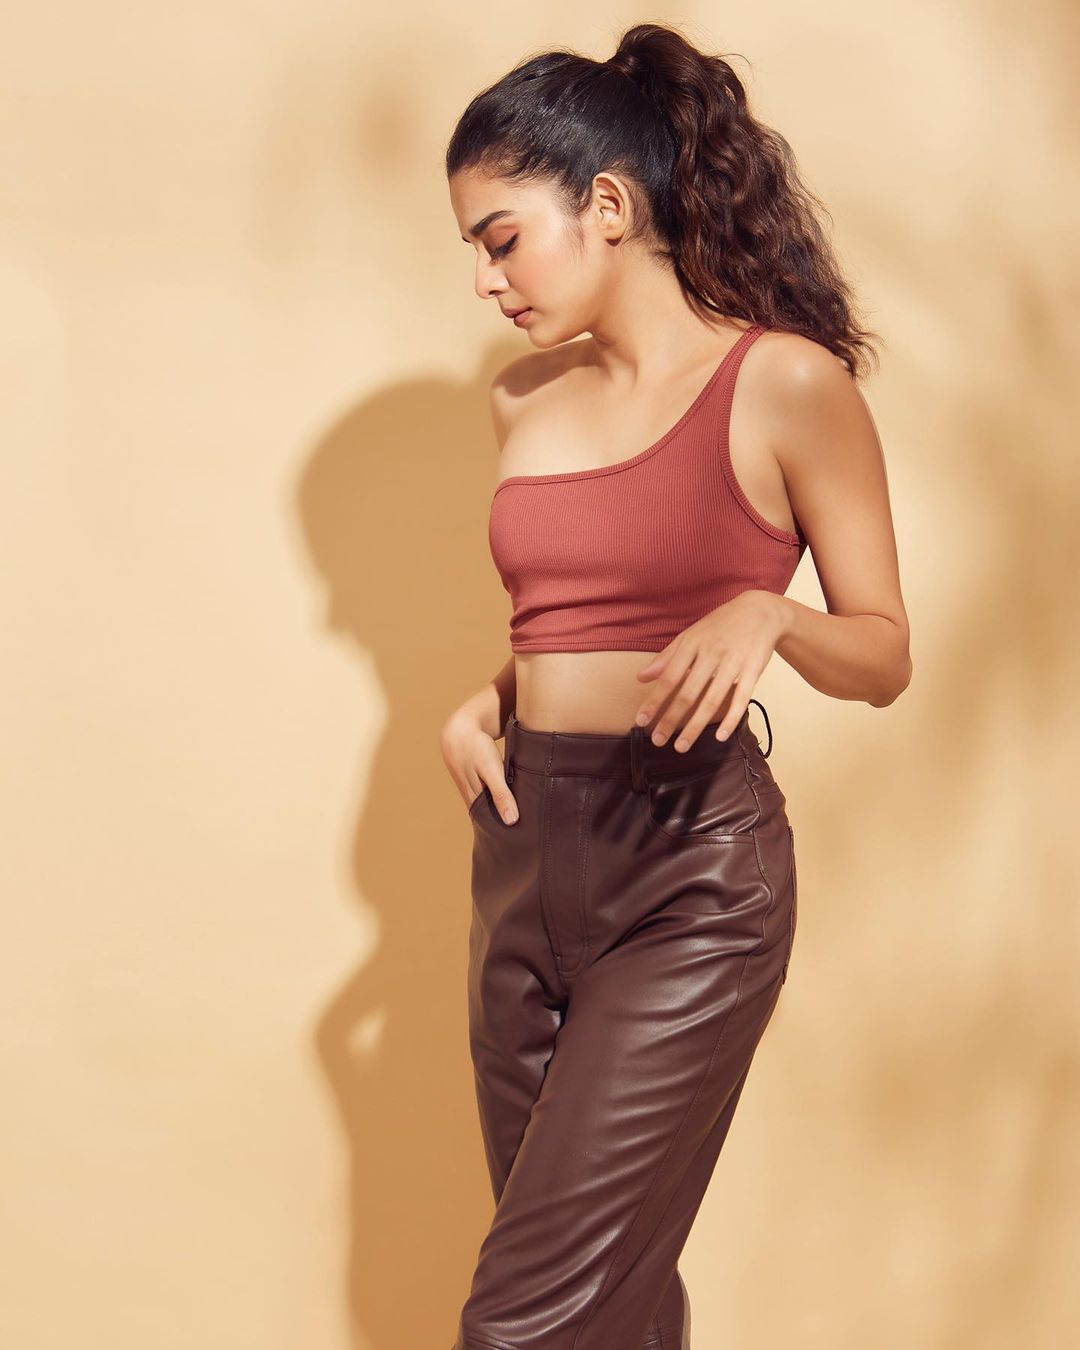 Mithila Palkar looks cool in the one-shoulder crop top and brown latex pants.